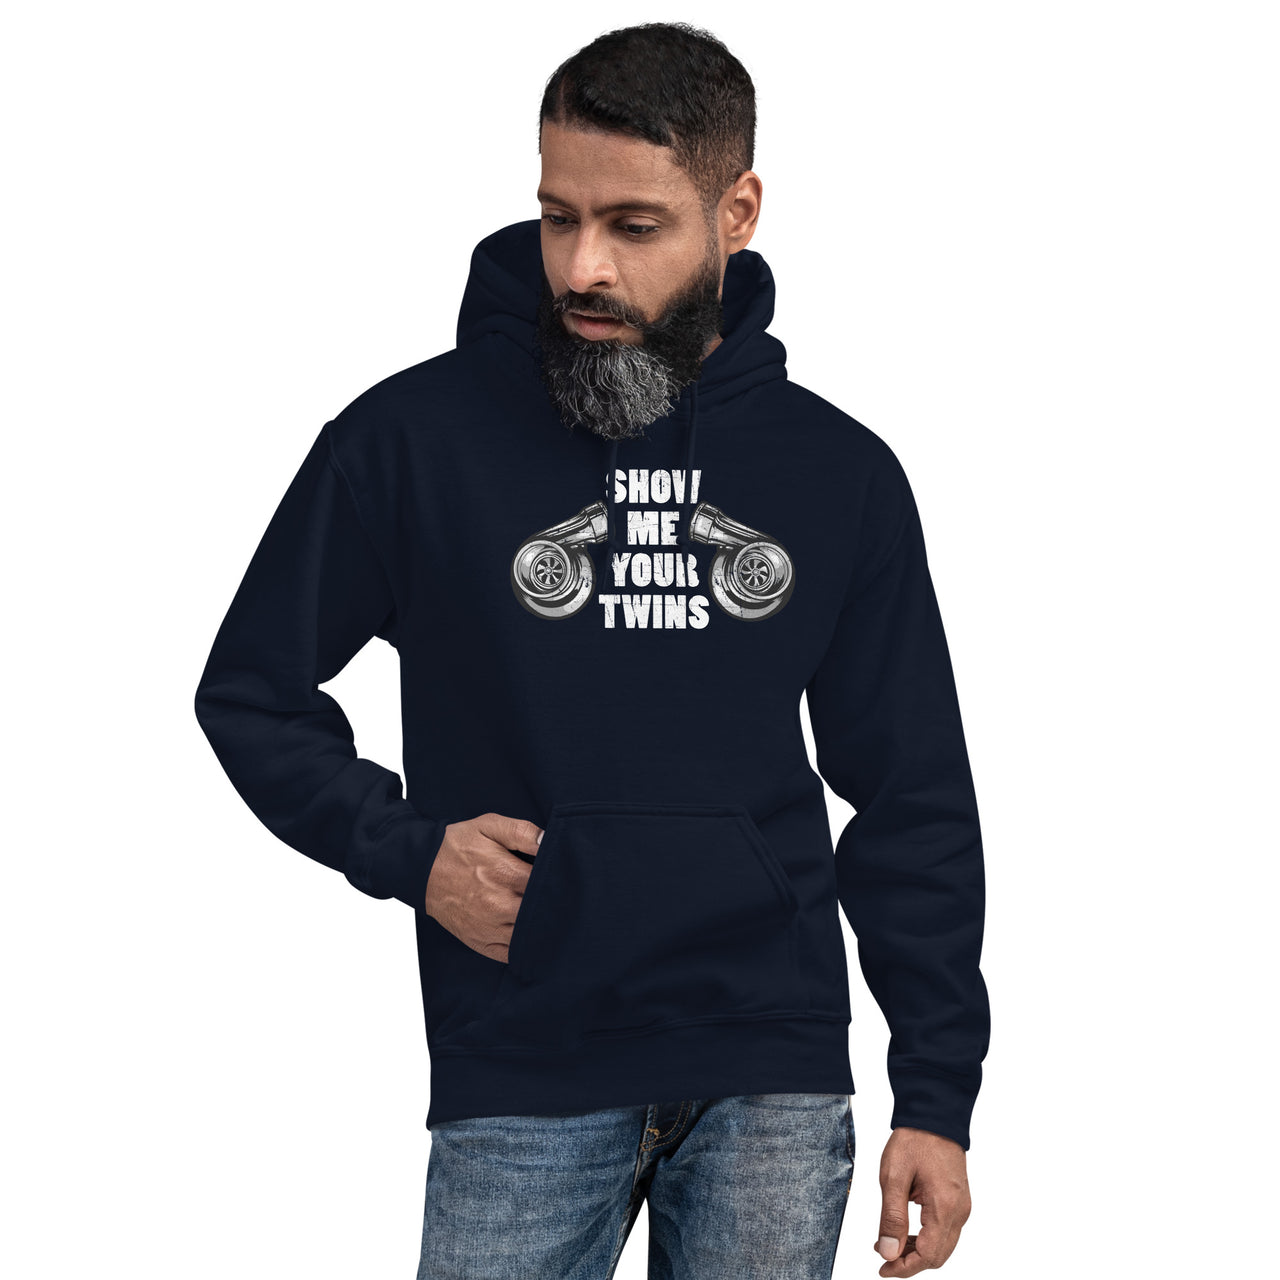 Show Me Your Twins Turbo Hoodie modeled in navy